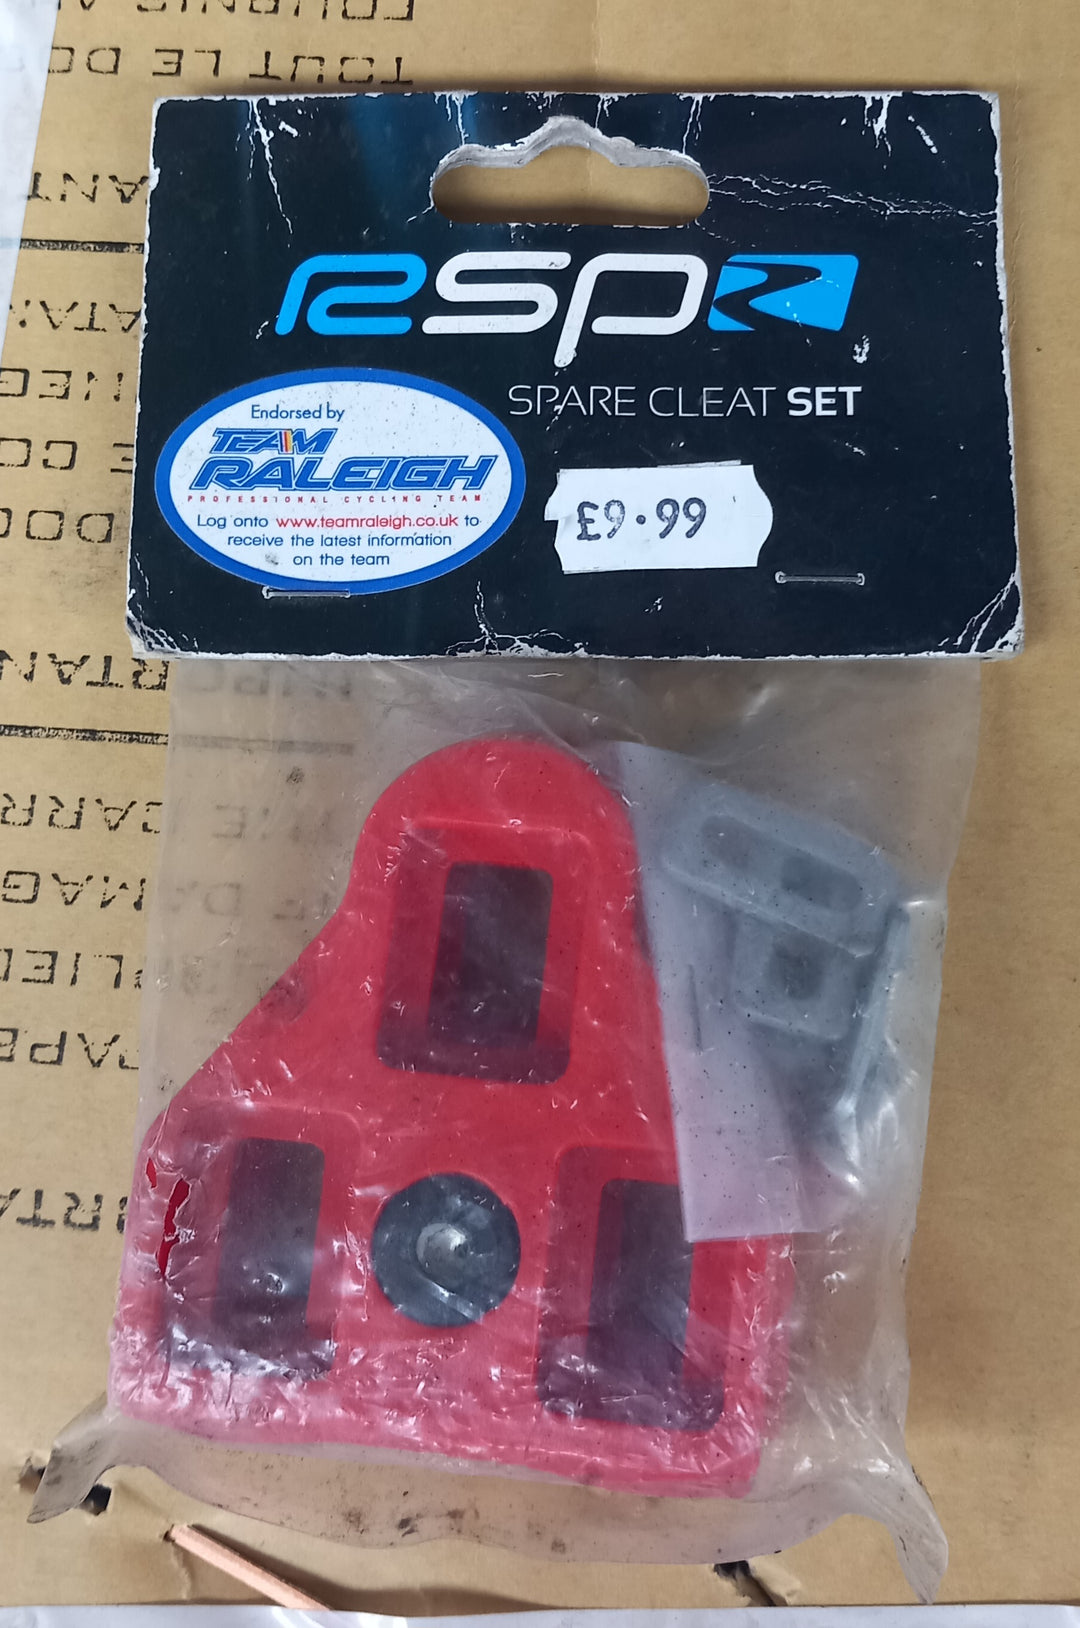 RSP spare cleat set